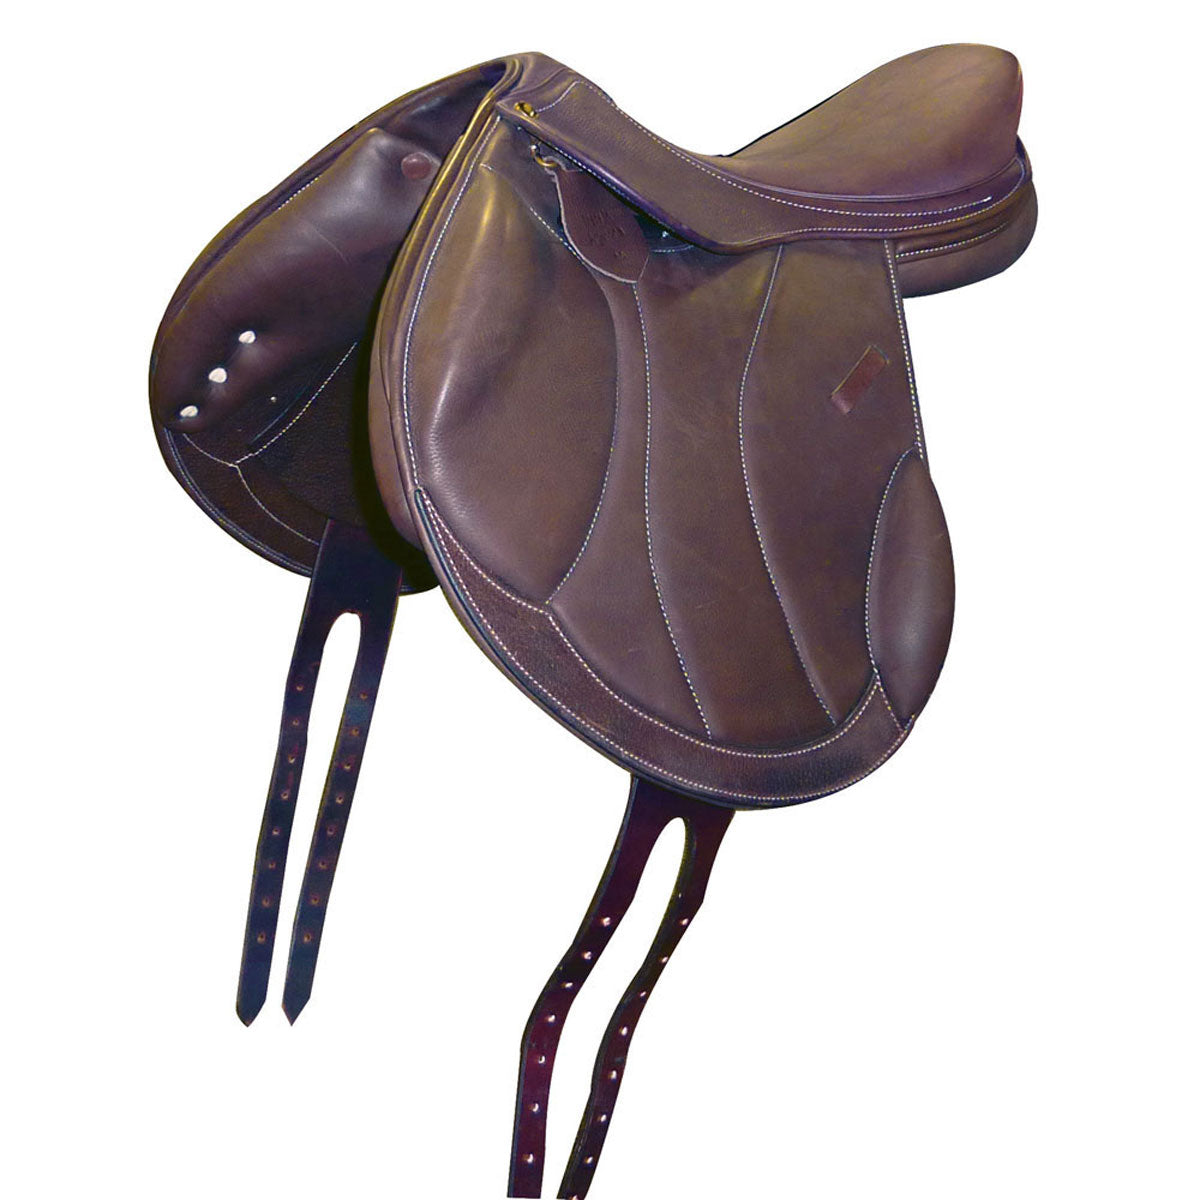 Pro-Trainer Advanced Ride Deluxe Forward Flap IGS Saddle - Brown